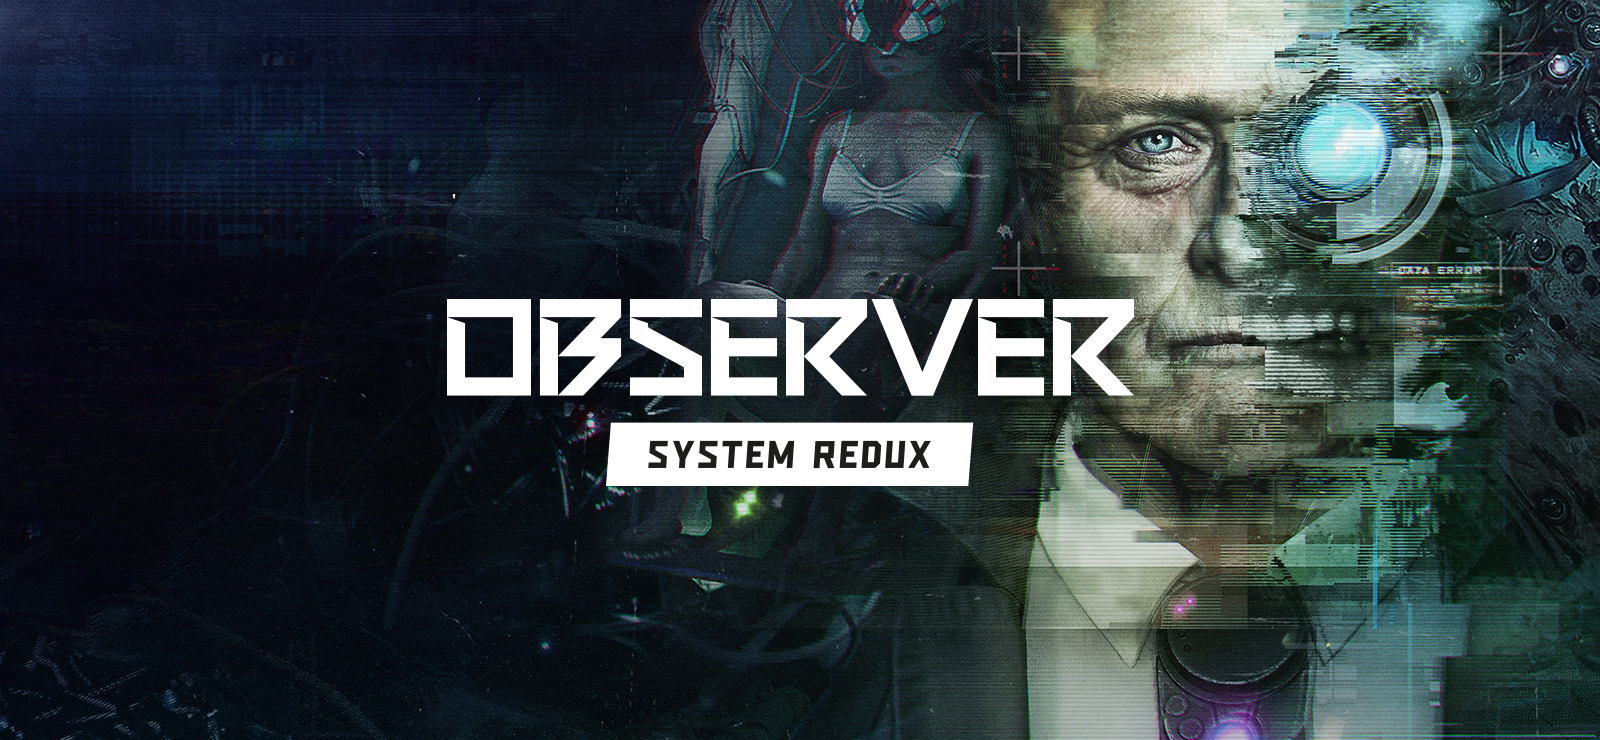 Observer System Redux 2020 Wallpapers